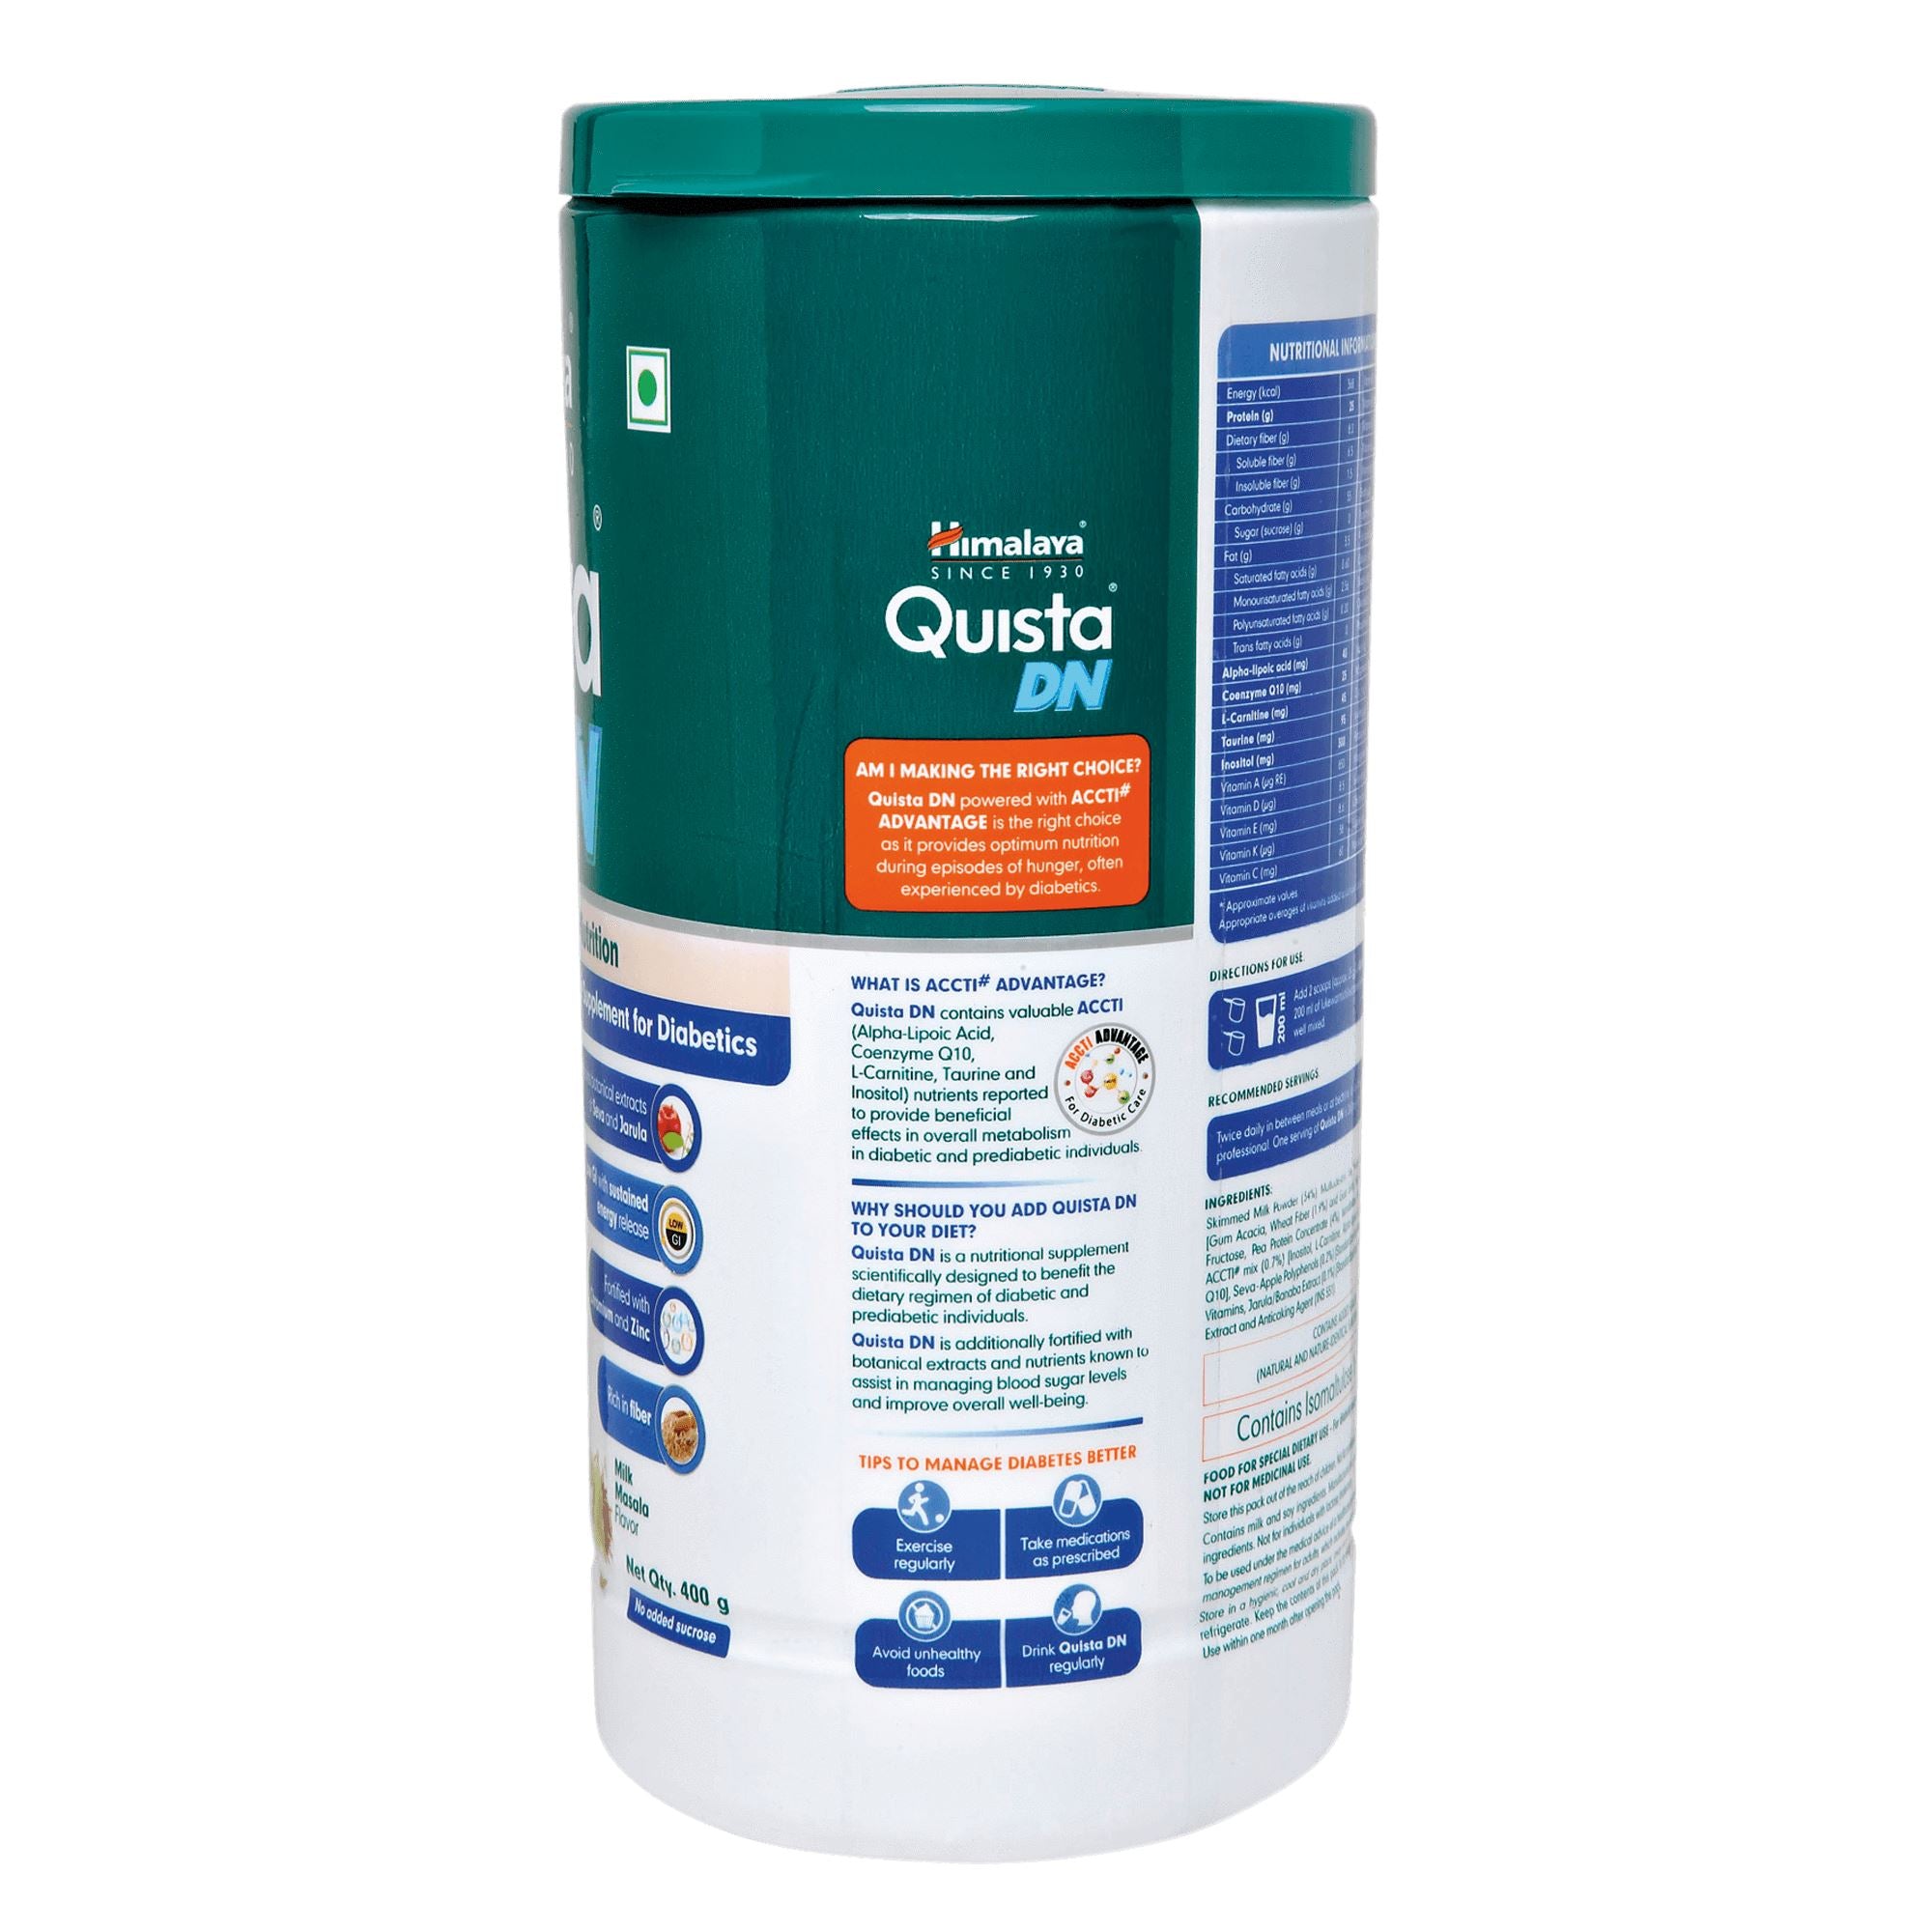 Himalaya Quista DN - Researched Nutritional Supplement for Diabetics